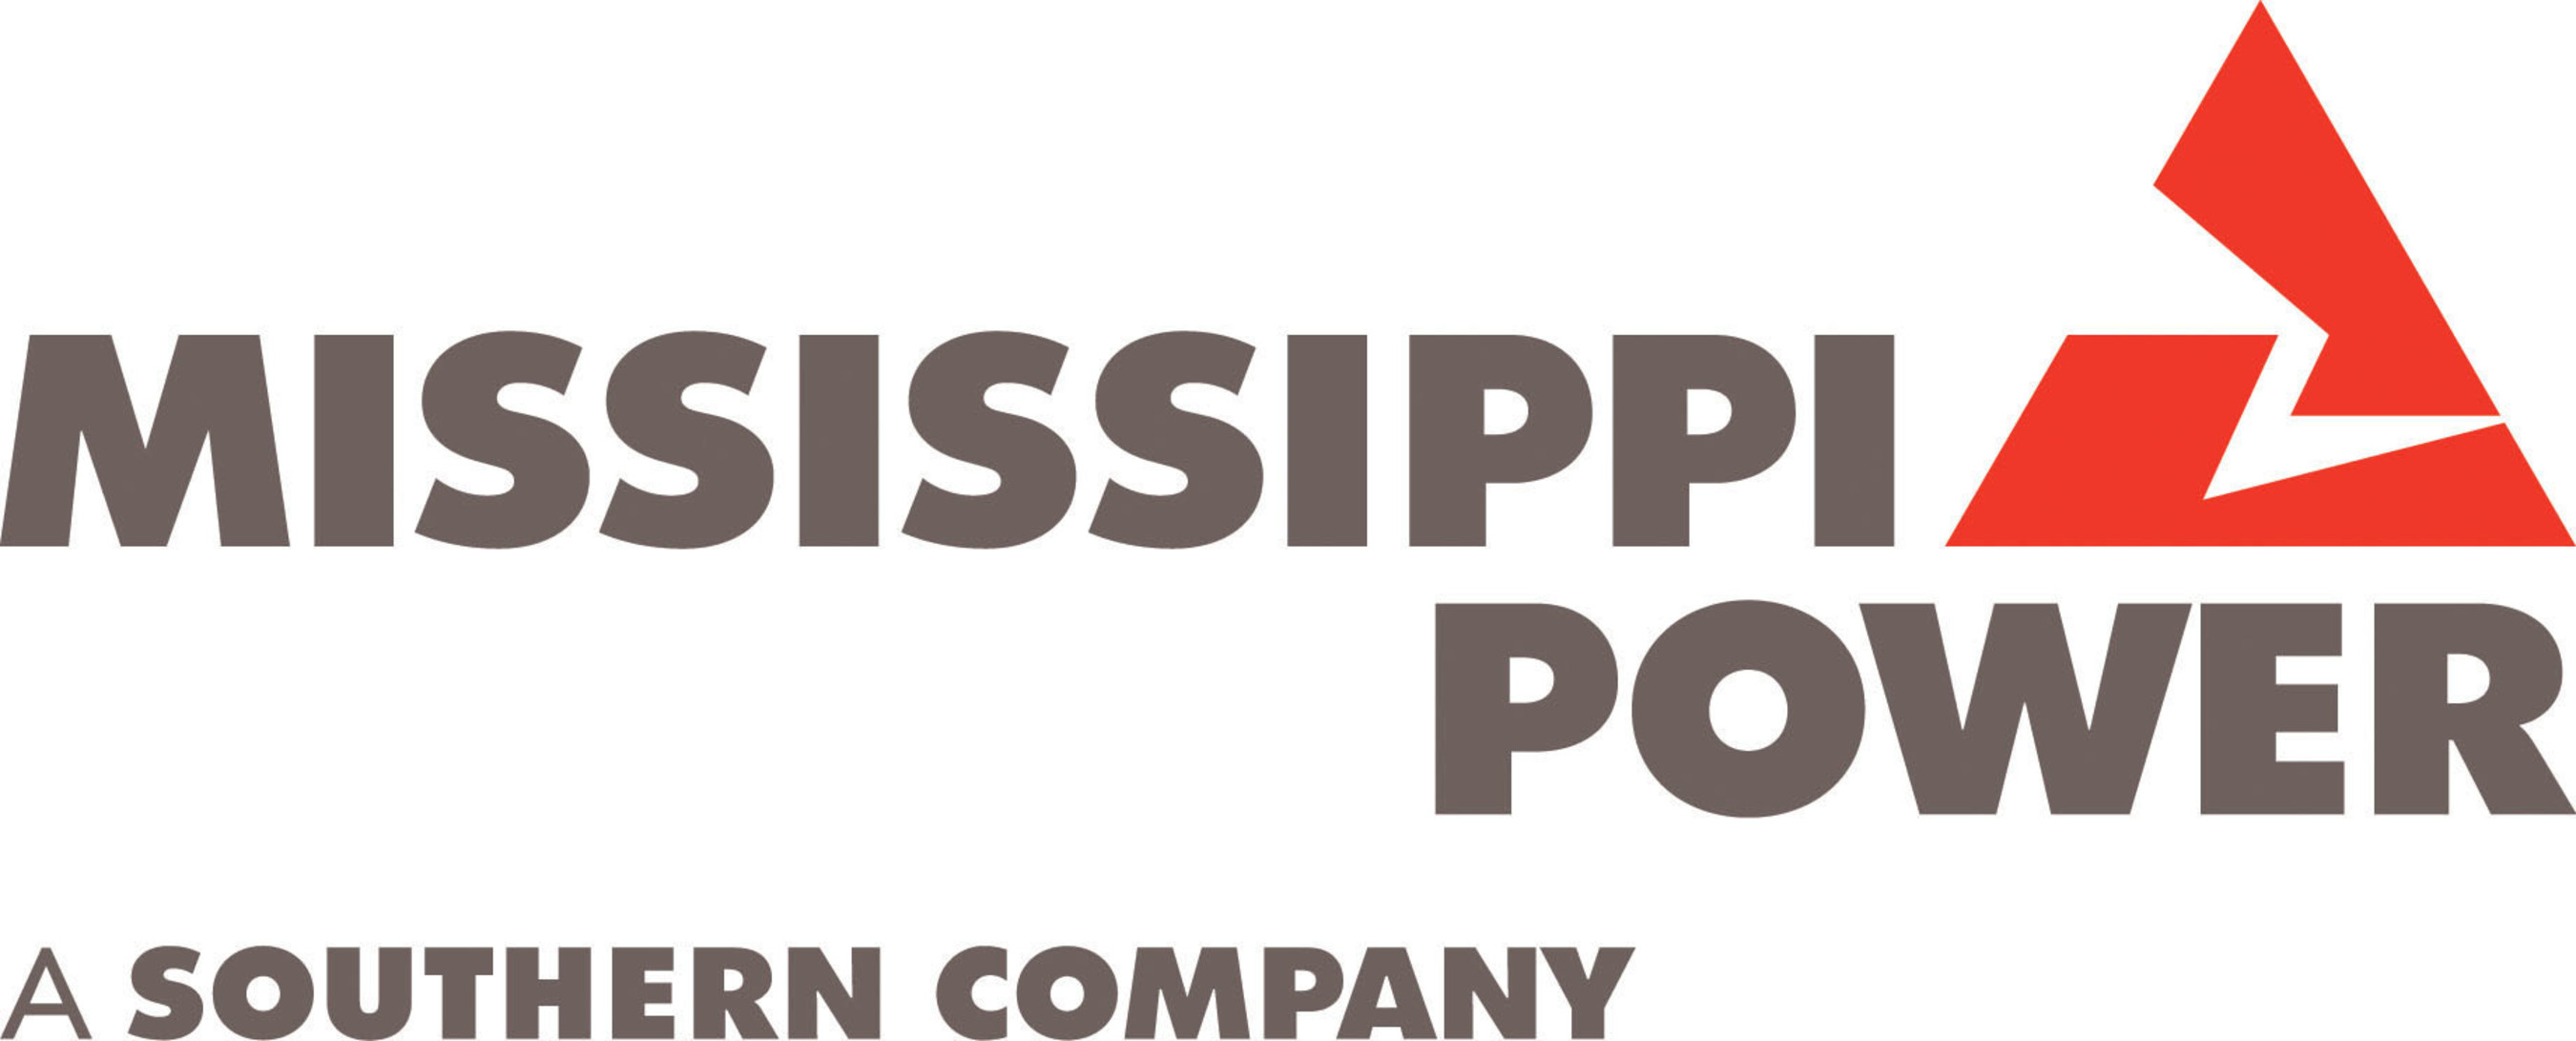 mississippi-power-announces-settlement-with-sierra-club-conversions-or